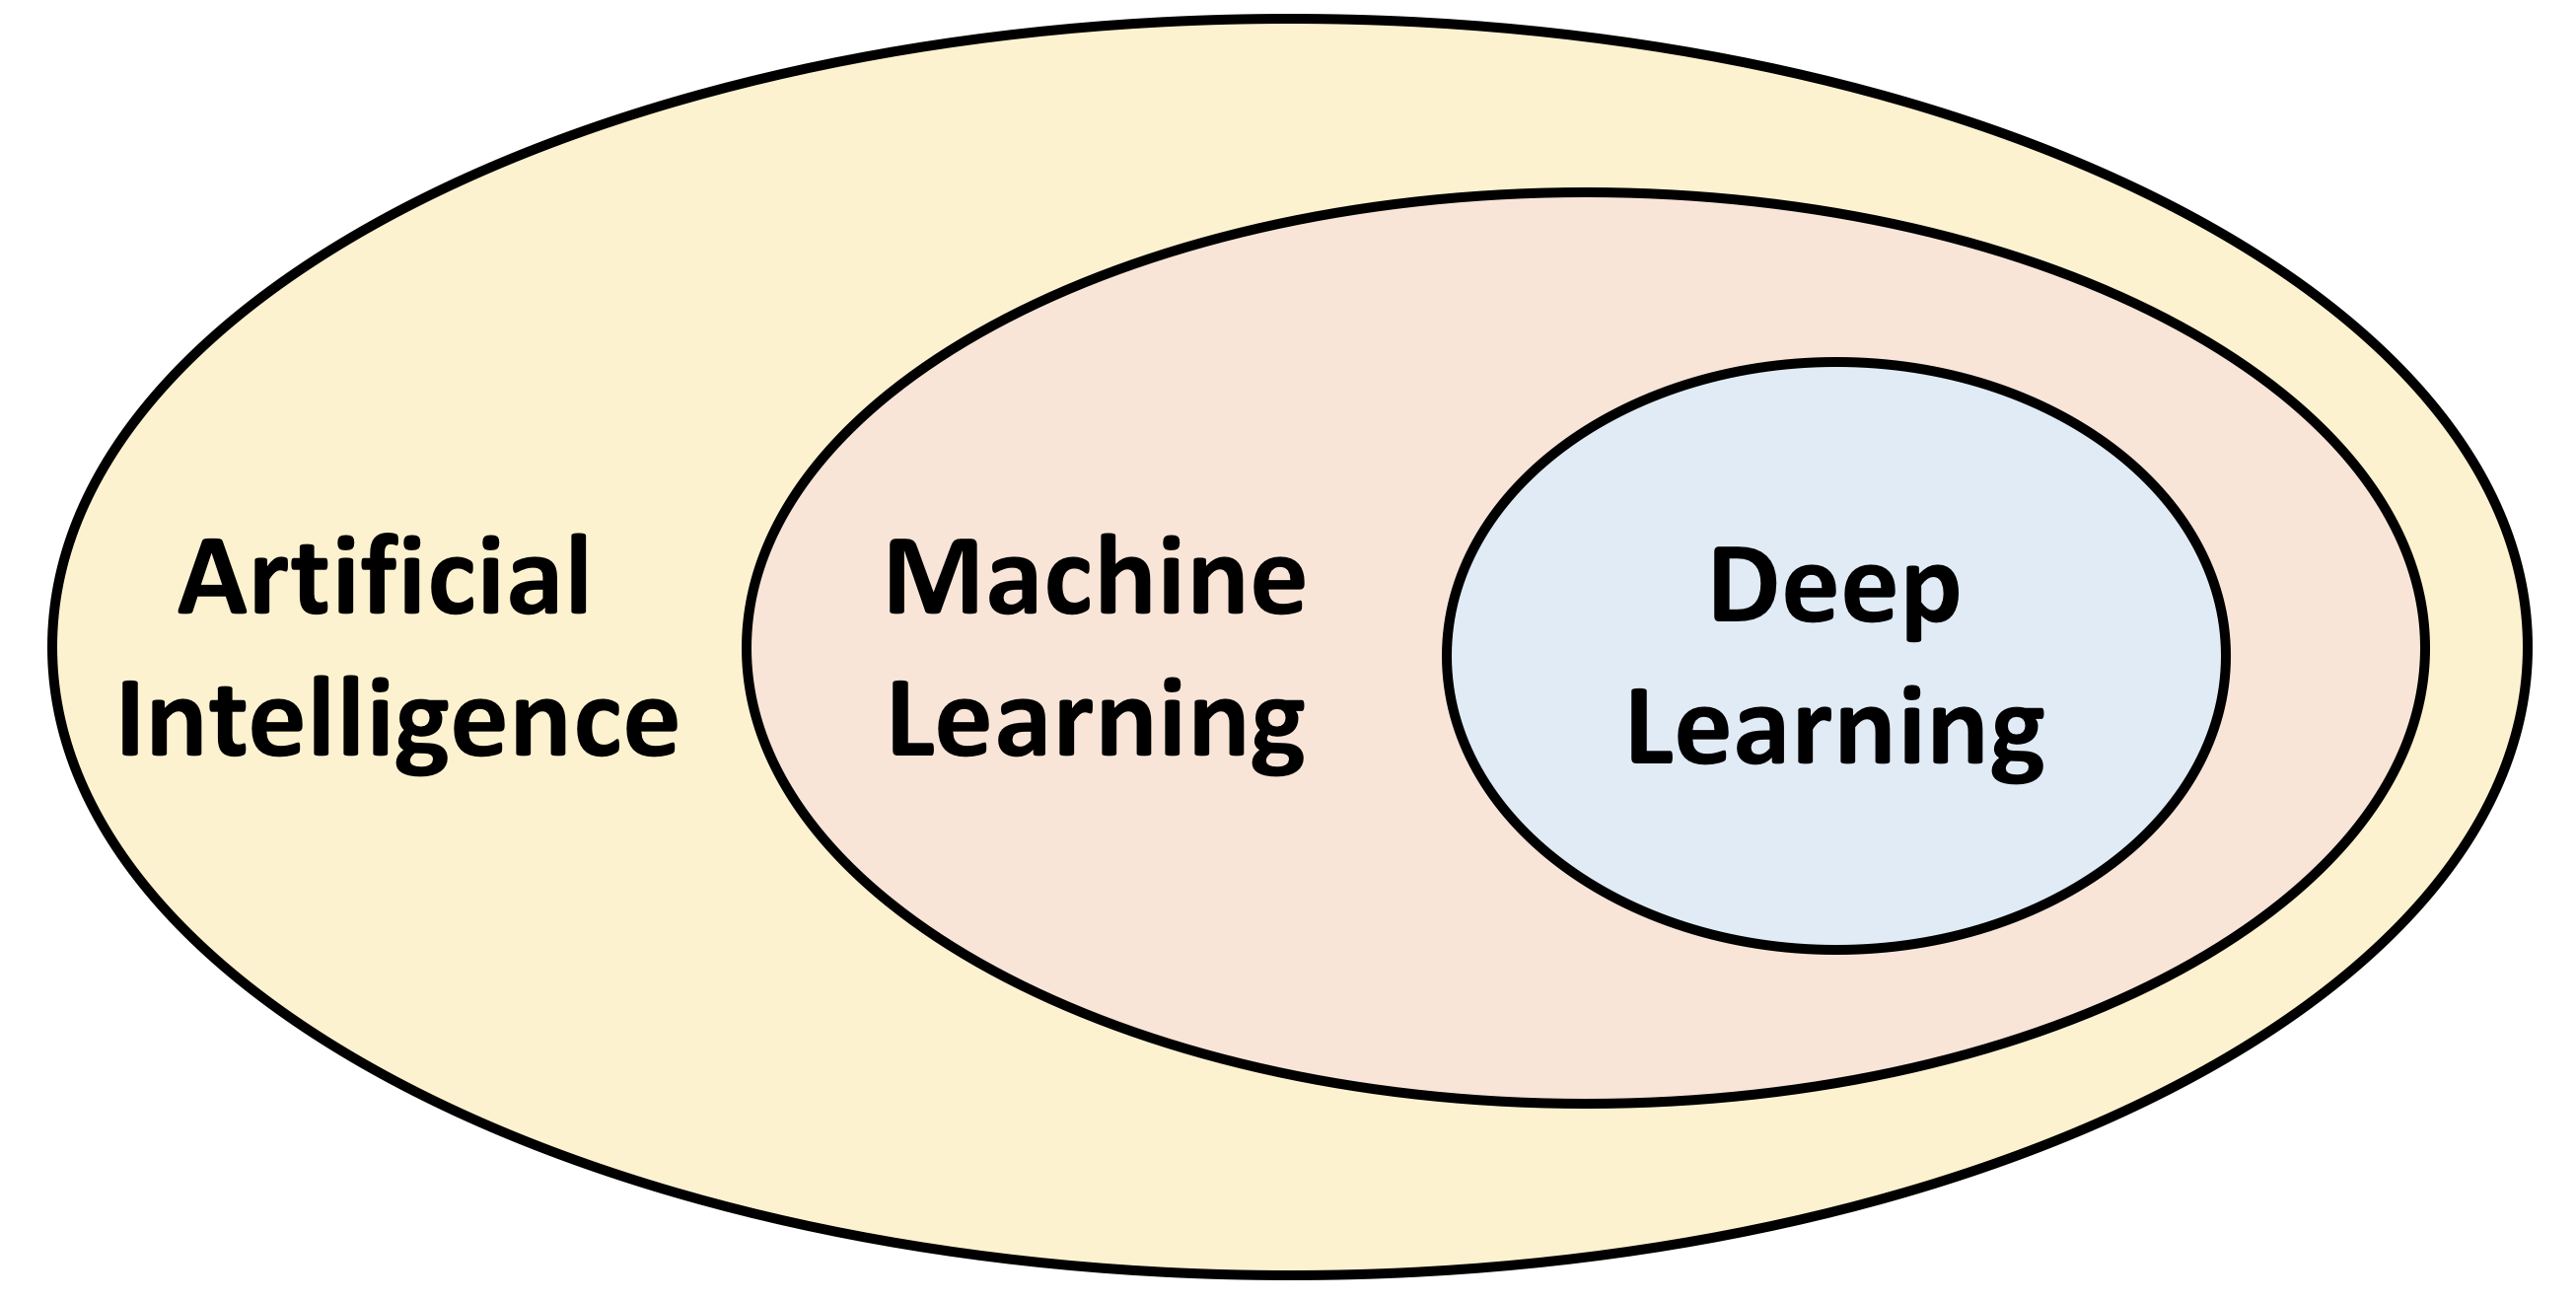 6 Tips For Getting Started With Machine Learning - Bouvet ...